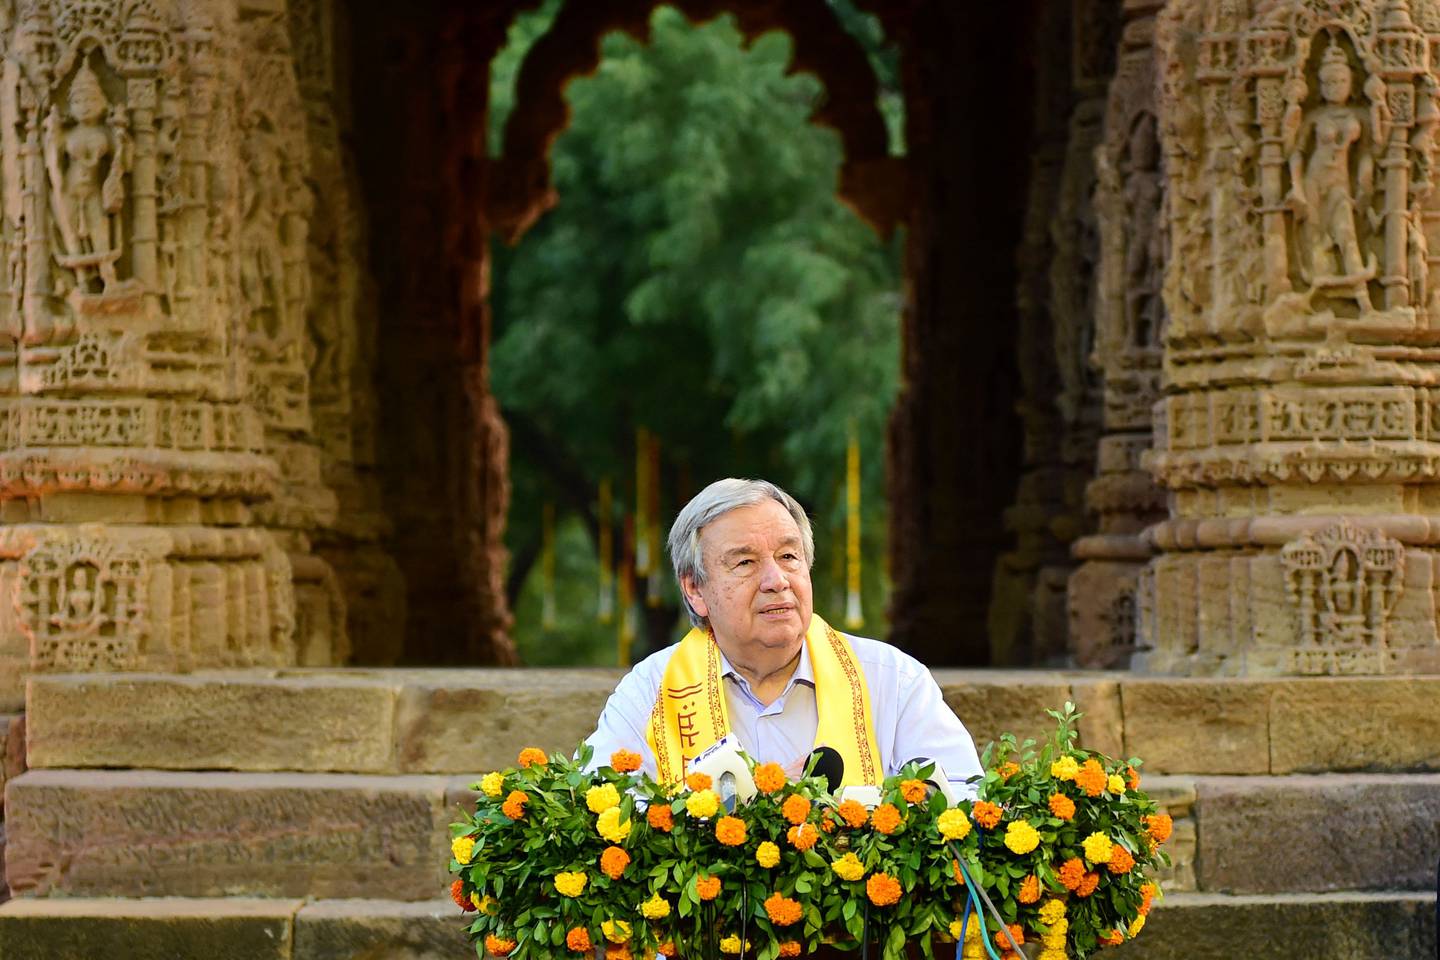 United Nations Secretary General Antonio Guterres speaks during his visit at the Sun Temple in Modhera, in India's Gujarat state on October 20, 2022.  (AFP)